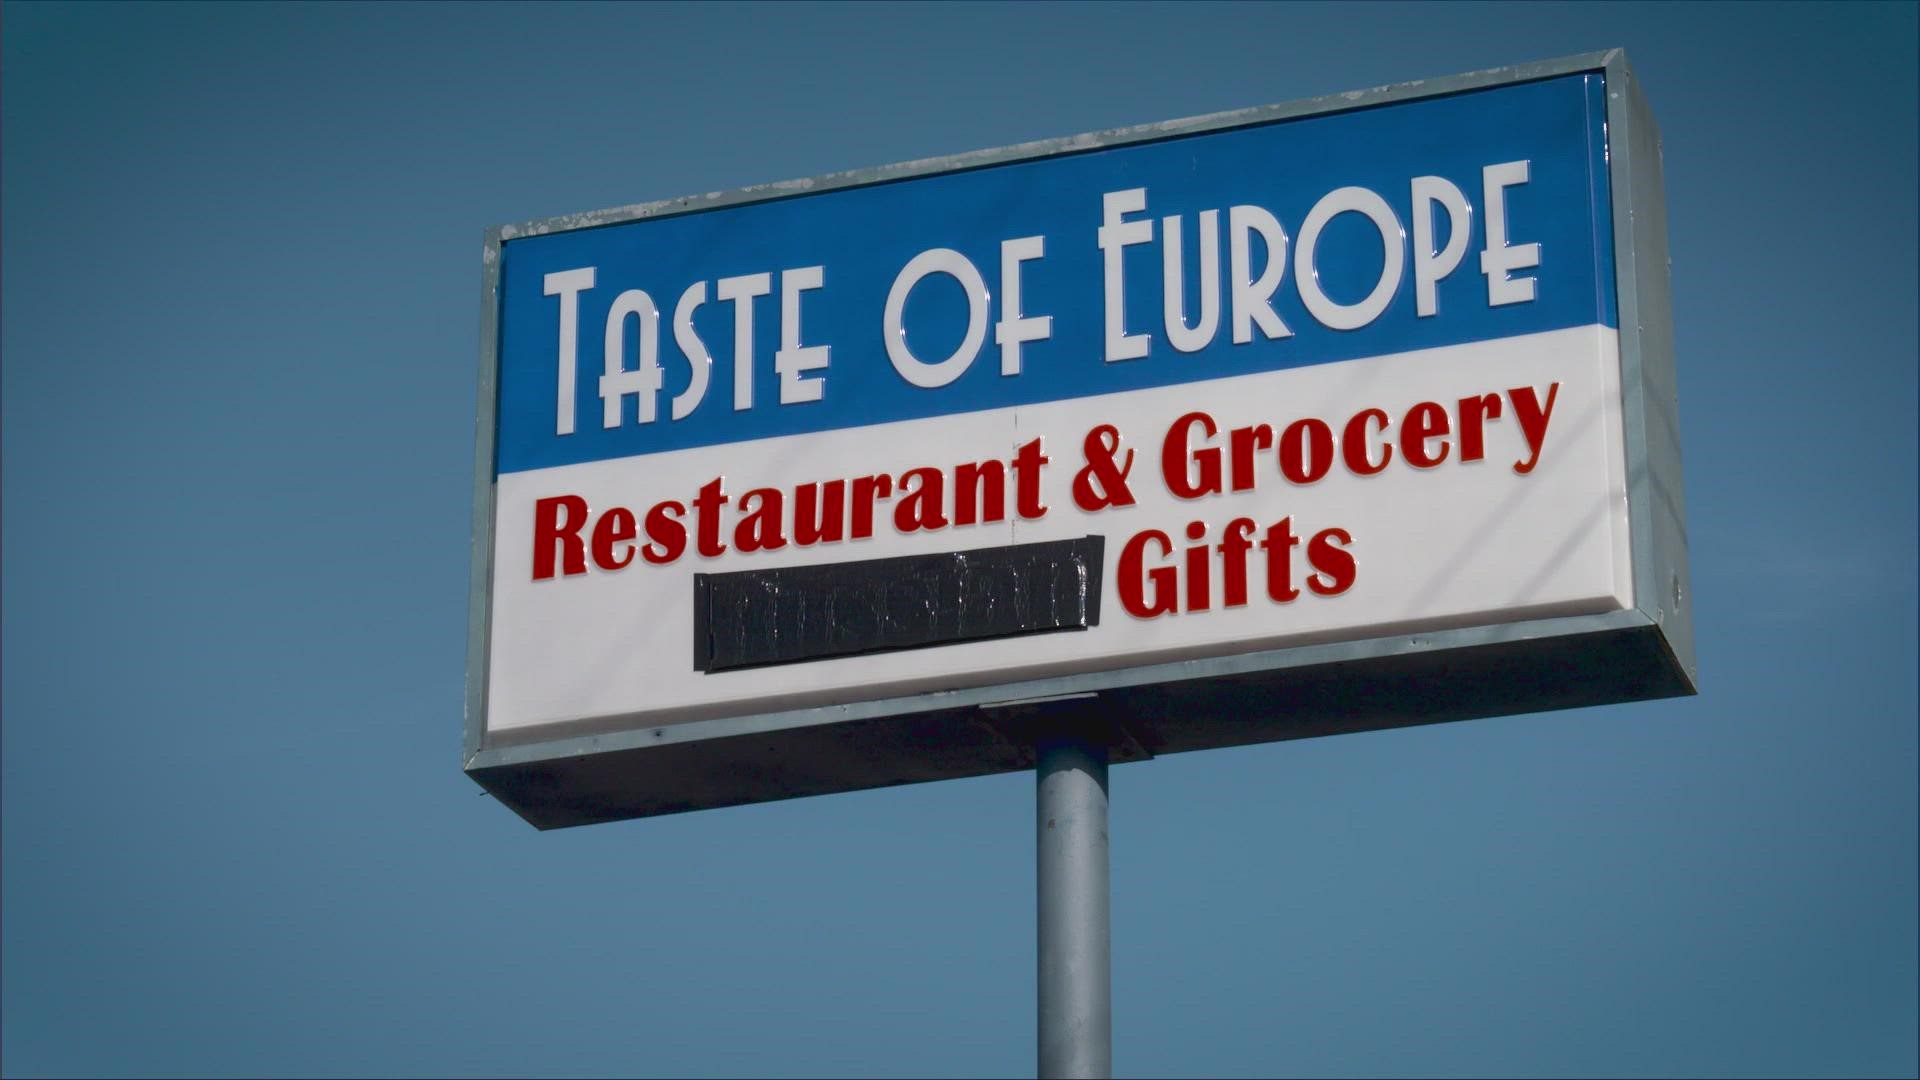 Taste of Europe planned to eventually remove “Russian” from its sign to better reflect its menu. Threatening calls forced the owner to immediately make the change.